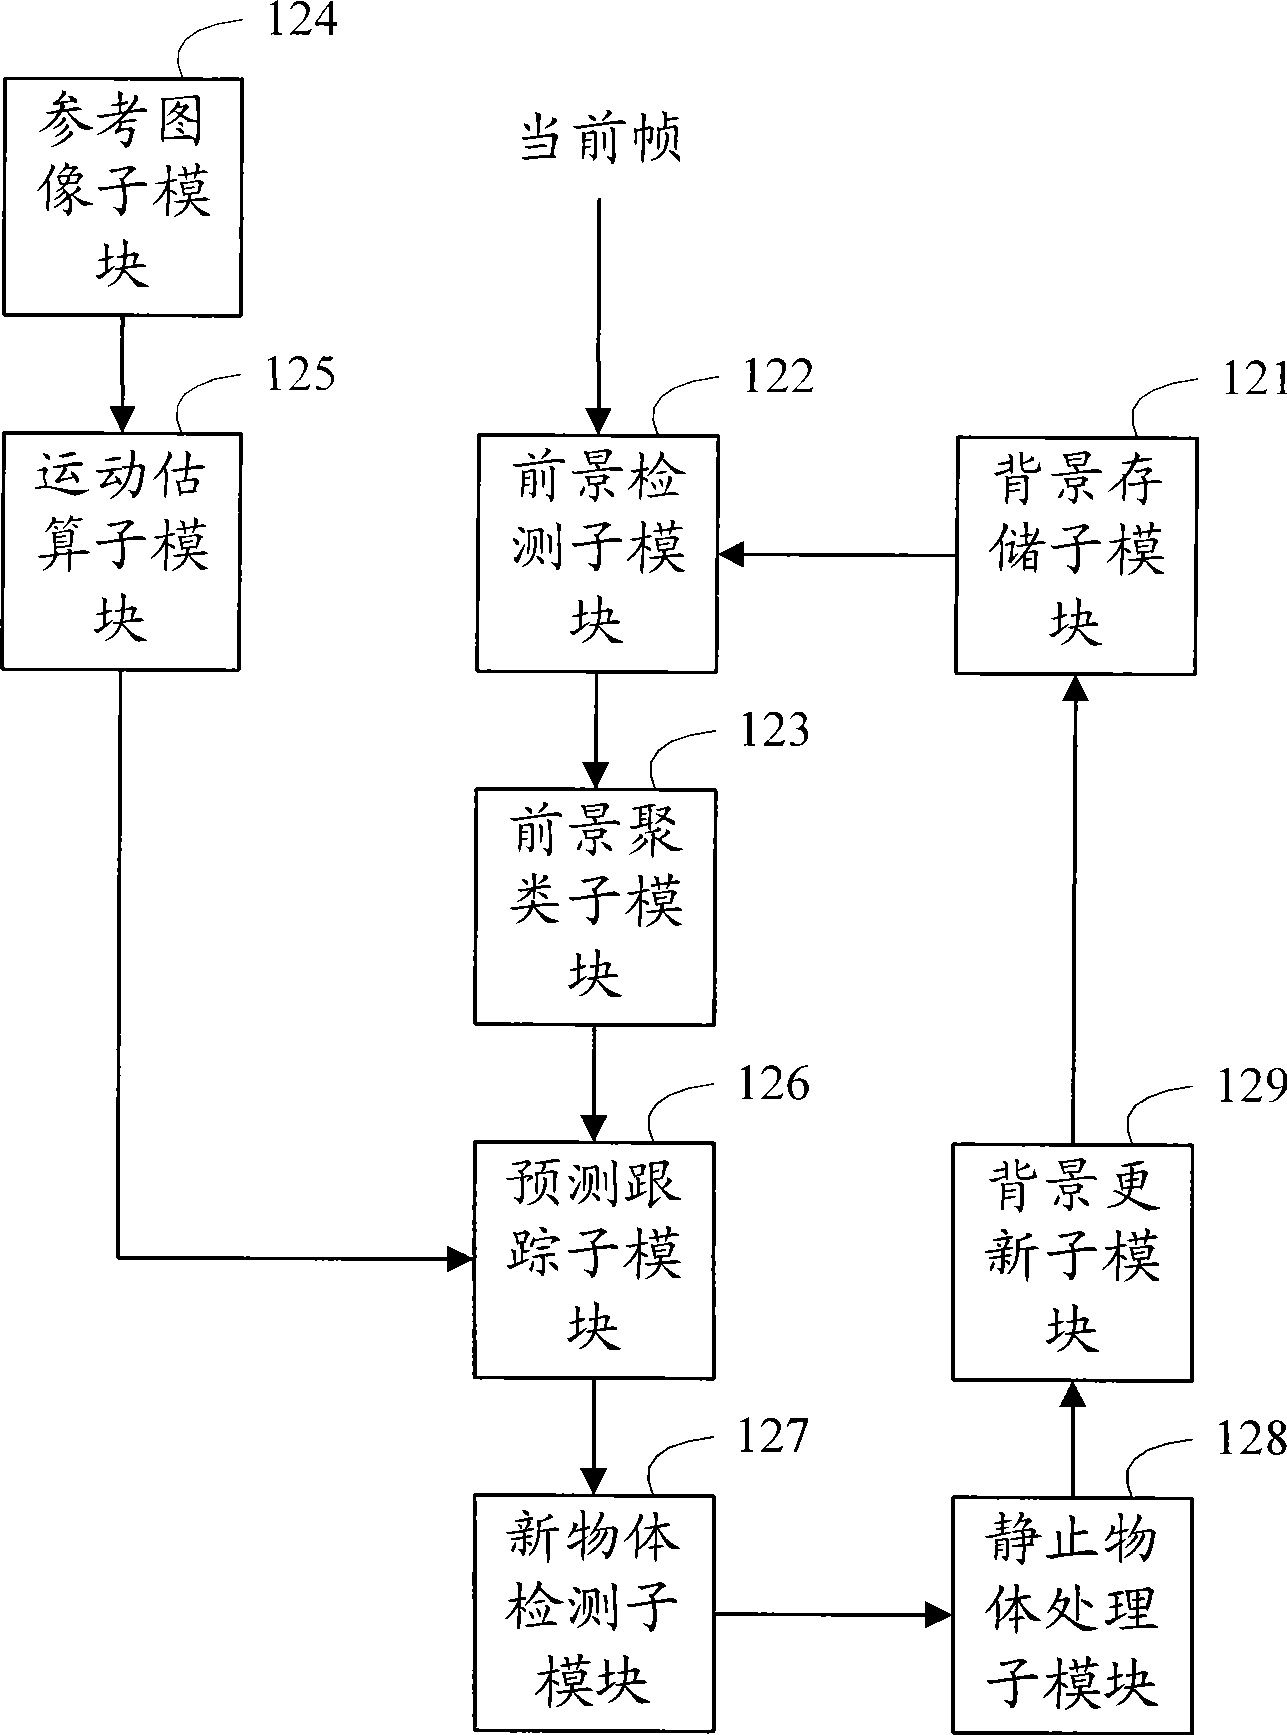 Front-end equipment in video monitor system and signal processing method in the front-end equipment